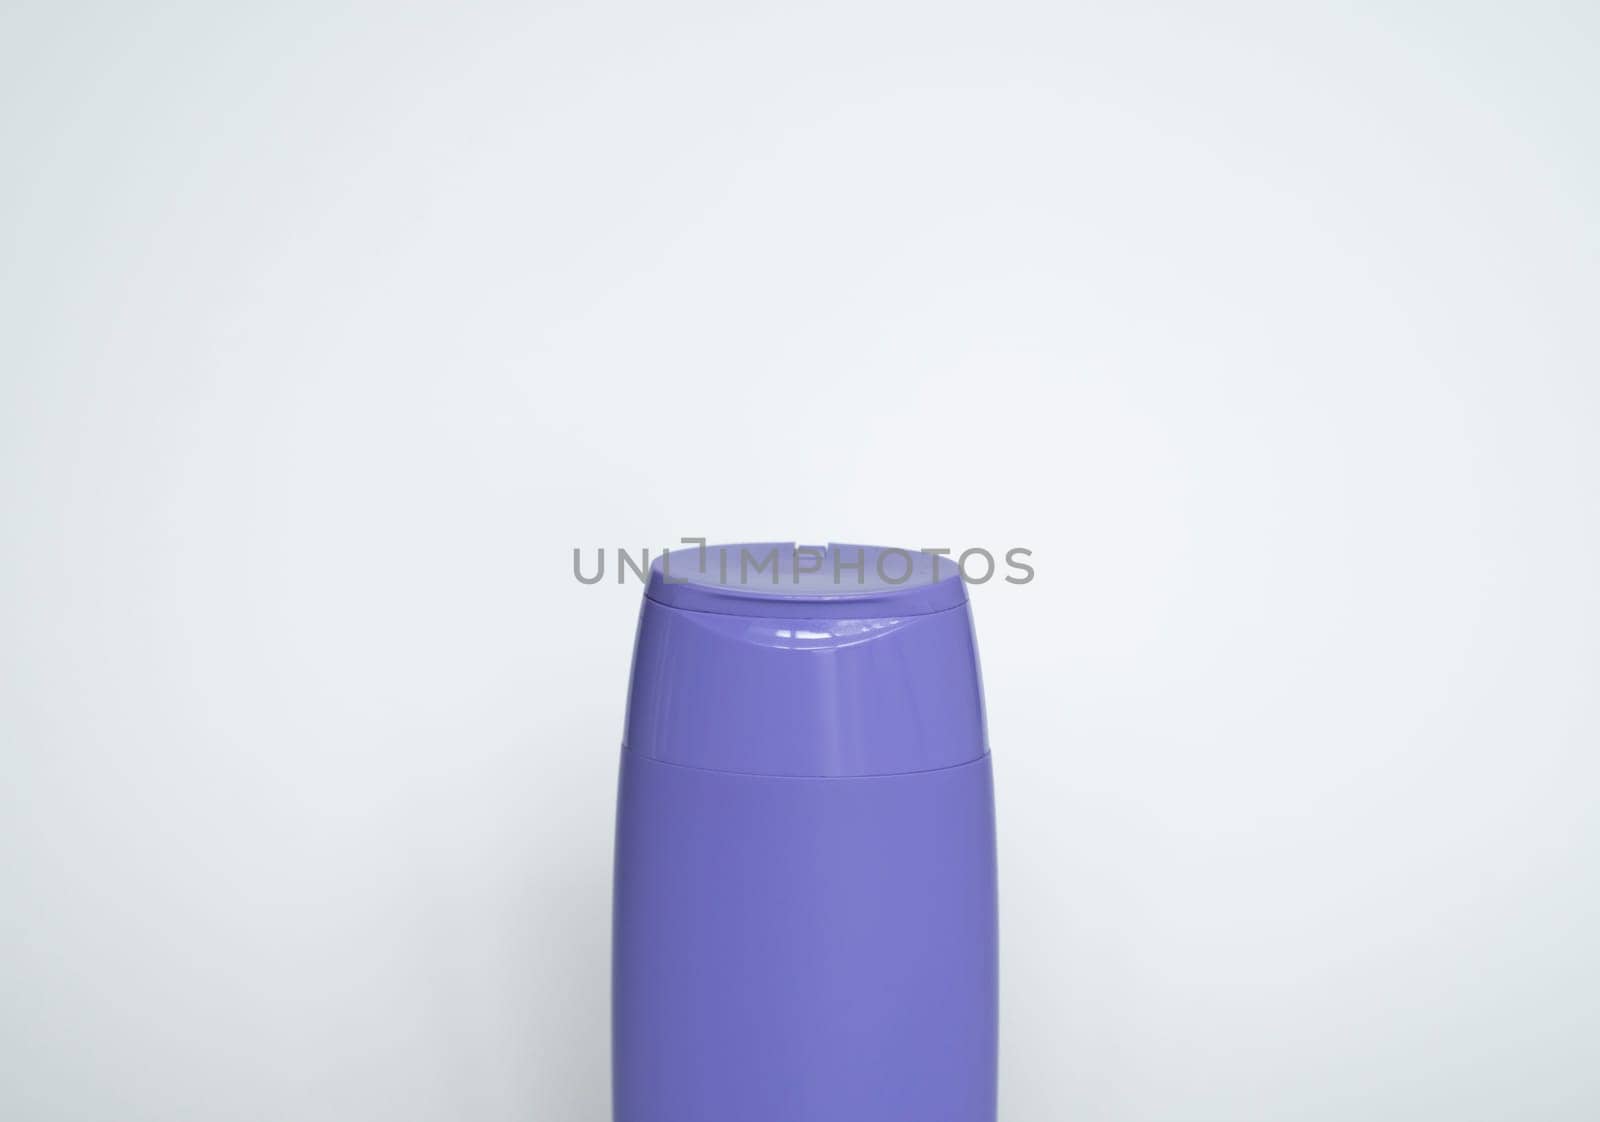 Violet plastic bottle of body care and beauty products. Studio photography of plastic bottle for shampoo, shower gel, creme isolated on white background